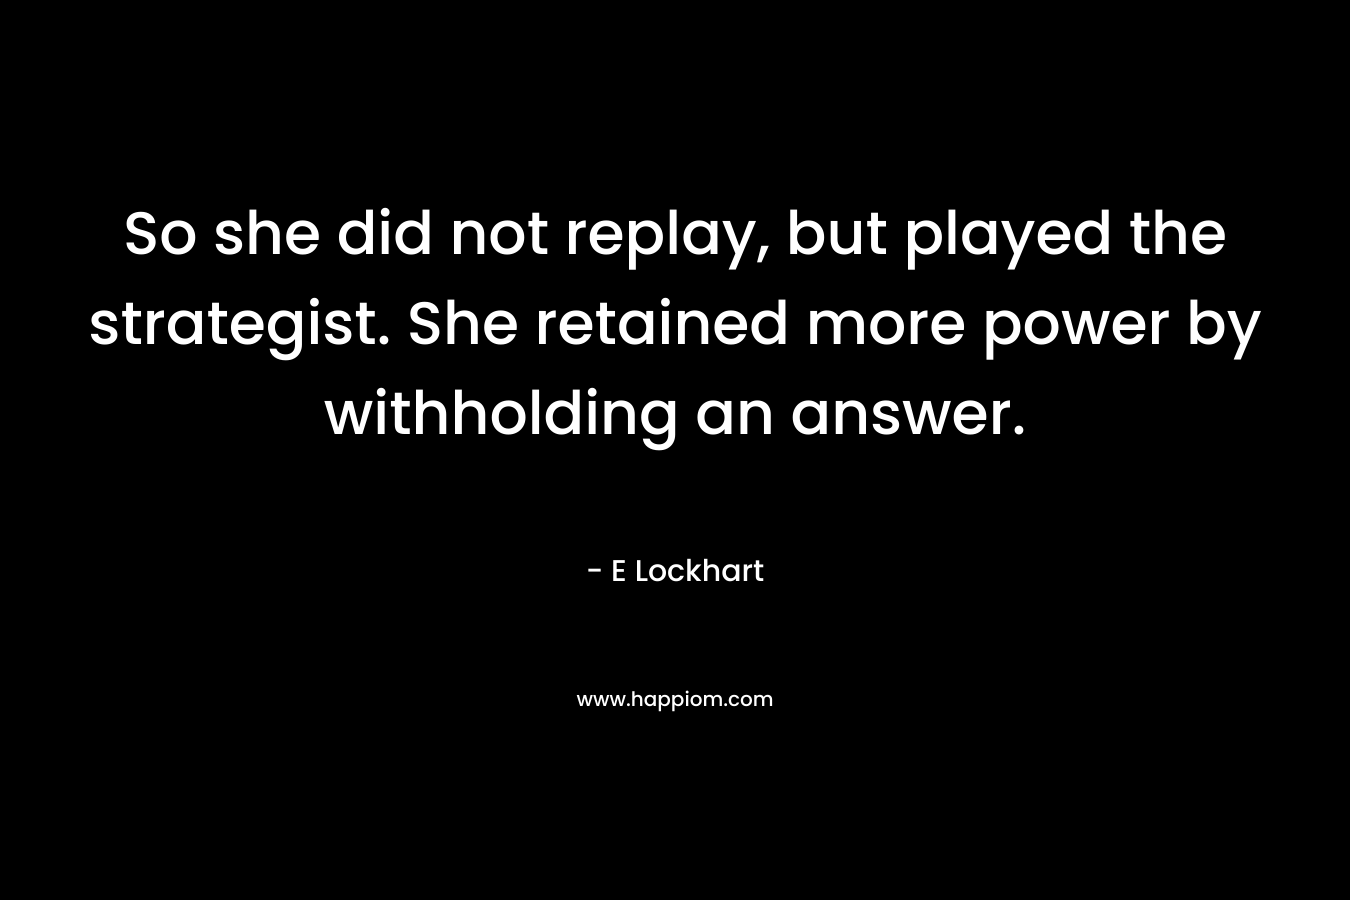 So she did not replay, but played the strategist. She retained more power by withholding an answer. – E Lockhart